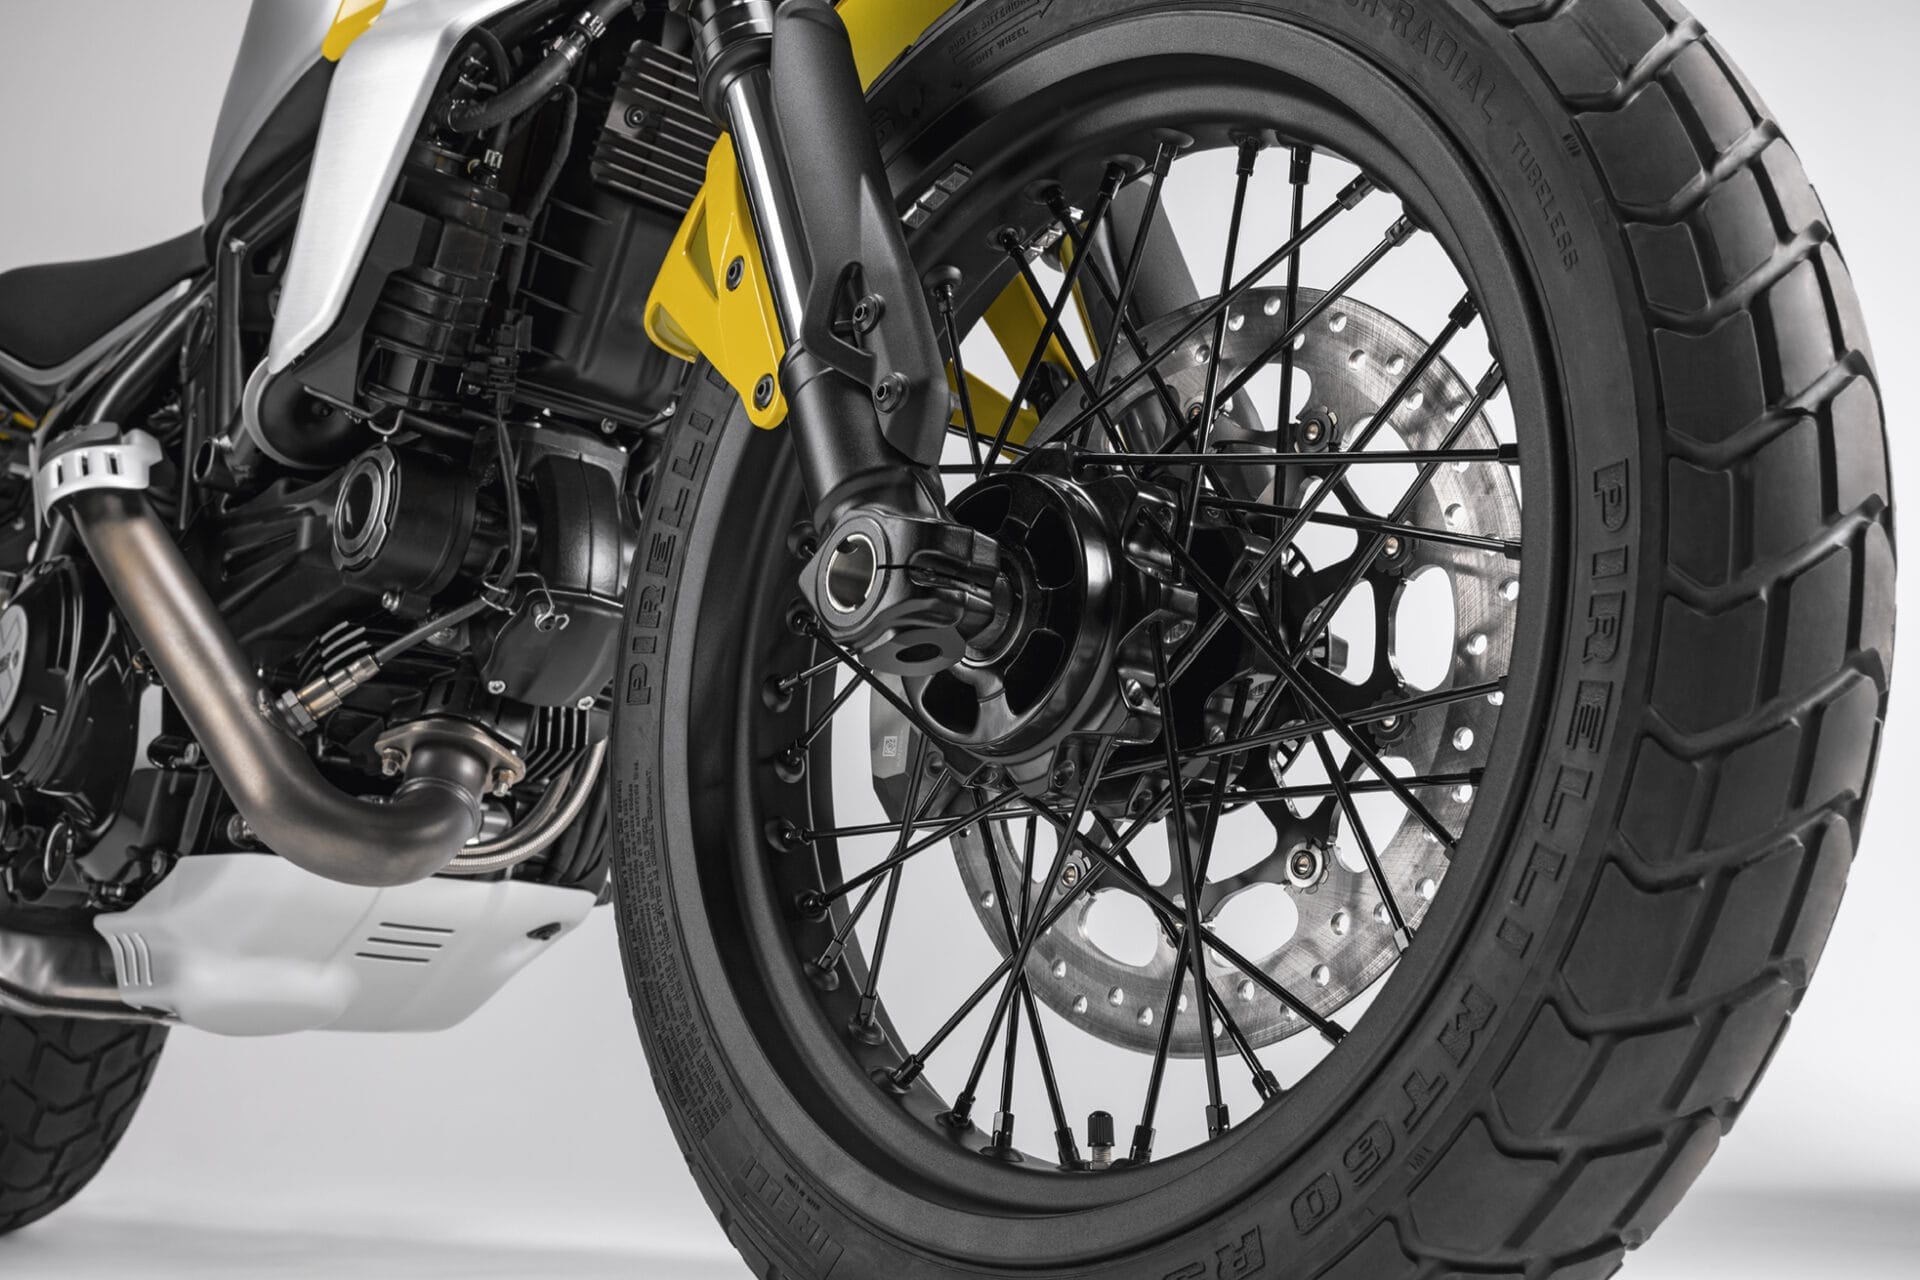 New range of accessories for the Ducati Scrambler: Tailor-made customization for every riding experience